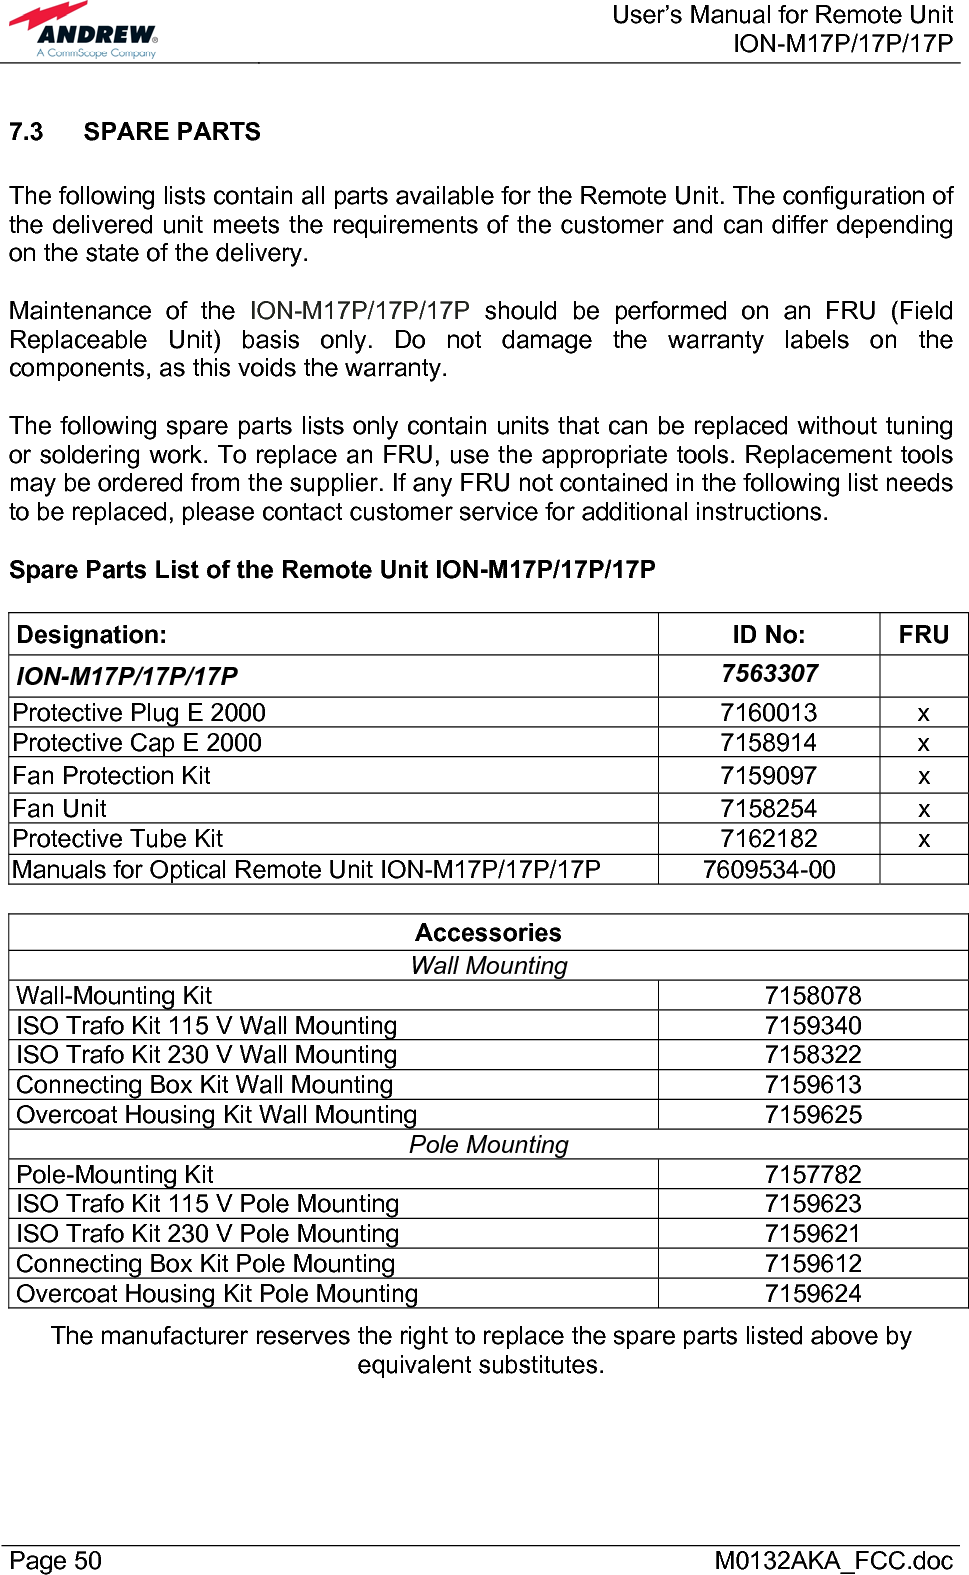  User’s Manual for Remote UnitION-M17P/17P/17P Page 50      M0132AKA_FCC.doc 7.3 SPARE PARTS  The following lists contain all parts available for the Remote Unit. The configuration of the delivered unit meets the requirements of the customer and can differ depending on the state of the delivery.  Maintenance of the ION-M17P/17P/17P should be performed on an FRU (Field Replaceable Unit) basis only. Do not damage the warranty labels on the components, as this voids the warranty.   The following spare parts lists only contain units that can be replaced without tuning or soldering work. To replace an FRU, use the appropriate tools. Replacement tools may be ordered from the supplier. If any FRU not contained in the following list needs to be replaced, please contact customer service for additional instructions.  Spare Parts List of the Remote Unit ION-M17P/17P/17P  Designation: ID No: FRU ION-M17P/17P/17P  7563307  Protective Plug E 2000  7160013  x Protective Cap E 2000  7158914  x Fan Protection Kit  7159097  x Fan Unit  7158254  x Protective Tube Kit  7162182  x Manuals for Optical Remote Unit ION-M17P/17P/17P  7609534-00    Accessories Wall Mounting Wall-Mounting Kit  7158078 ISO Trafo Kit 115 V Wall Mounting  7159340 ISO Trafo Kit 230 V Wall Mounting  7158322 Connecting Box Kit Wall Mounting  7159613 Overcoat Housing Kit Wall Mounting  7159625 Pole Mounting  Pole-Mounting Kit  7157782 ISO Trafo Kit 115 V Pole Mounting  7159623 ISO Trafo Kit 230 V Pole Mounting  7159621 Connecting Box Kit Pole Mounting  7159612 Overcoat Housing Kit Pole Mounting  7159624 The manufacturer reserves the right to replace the spare parts listed above by equivalent substitutes. 